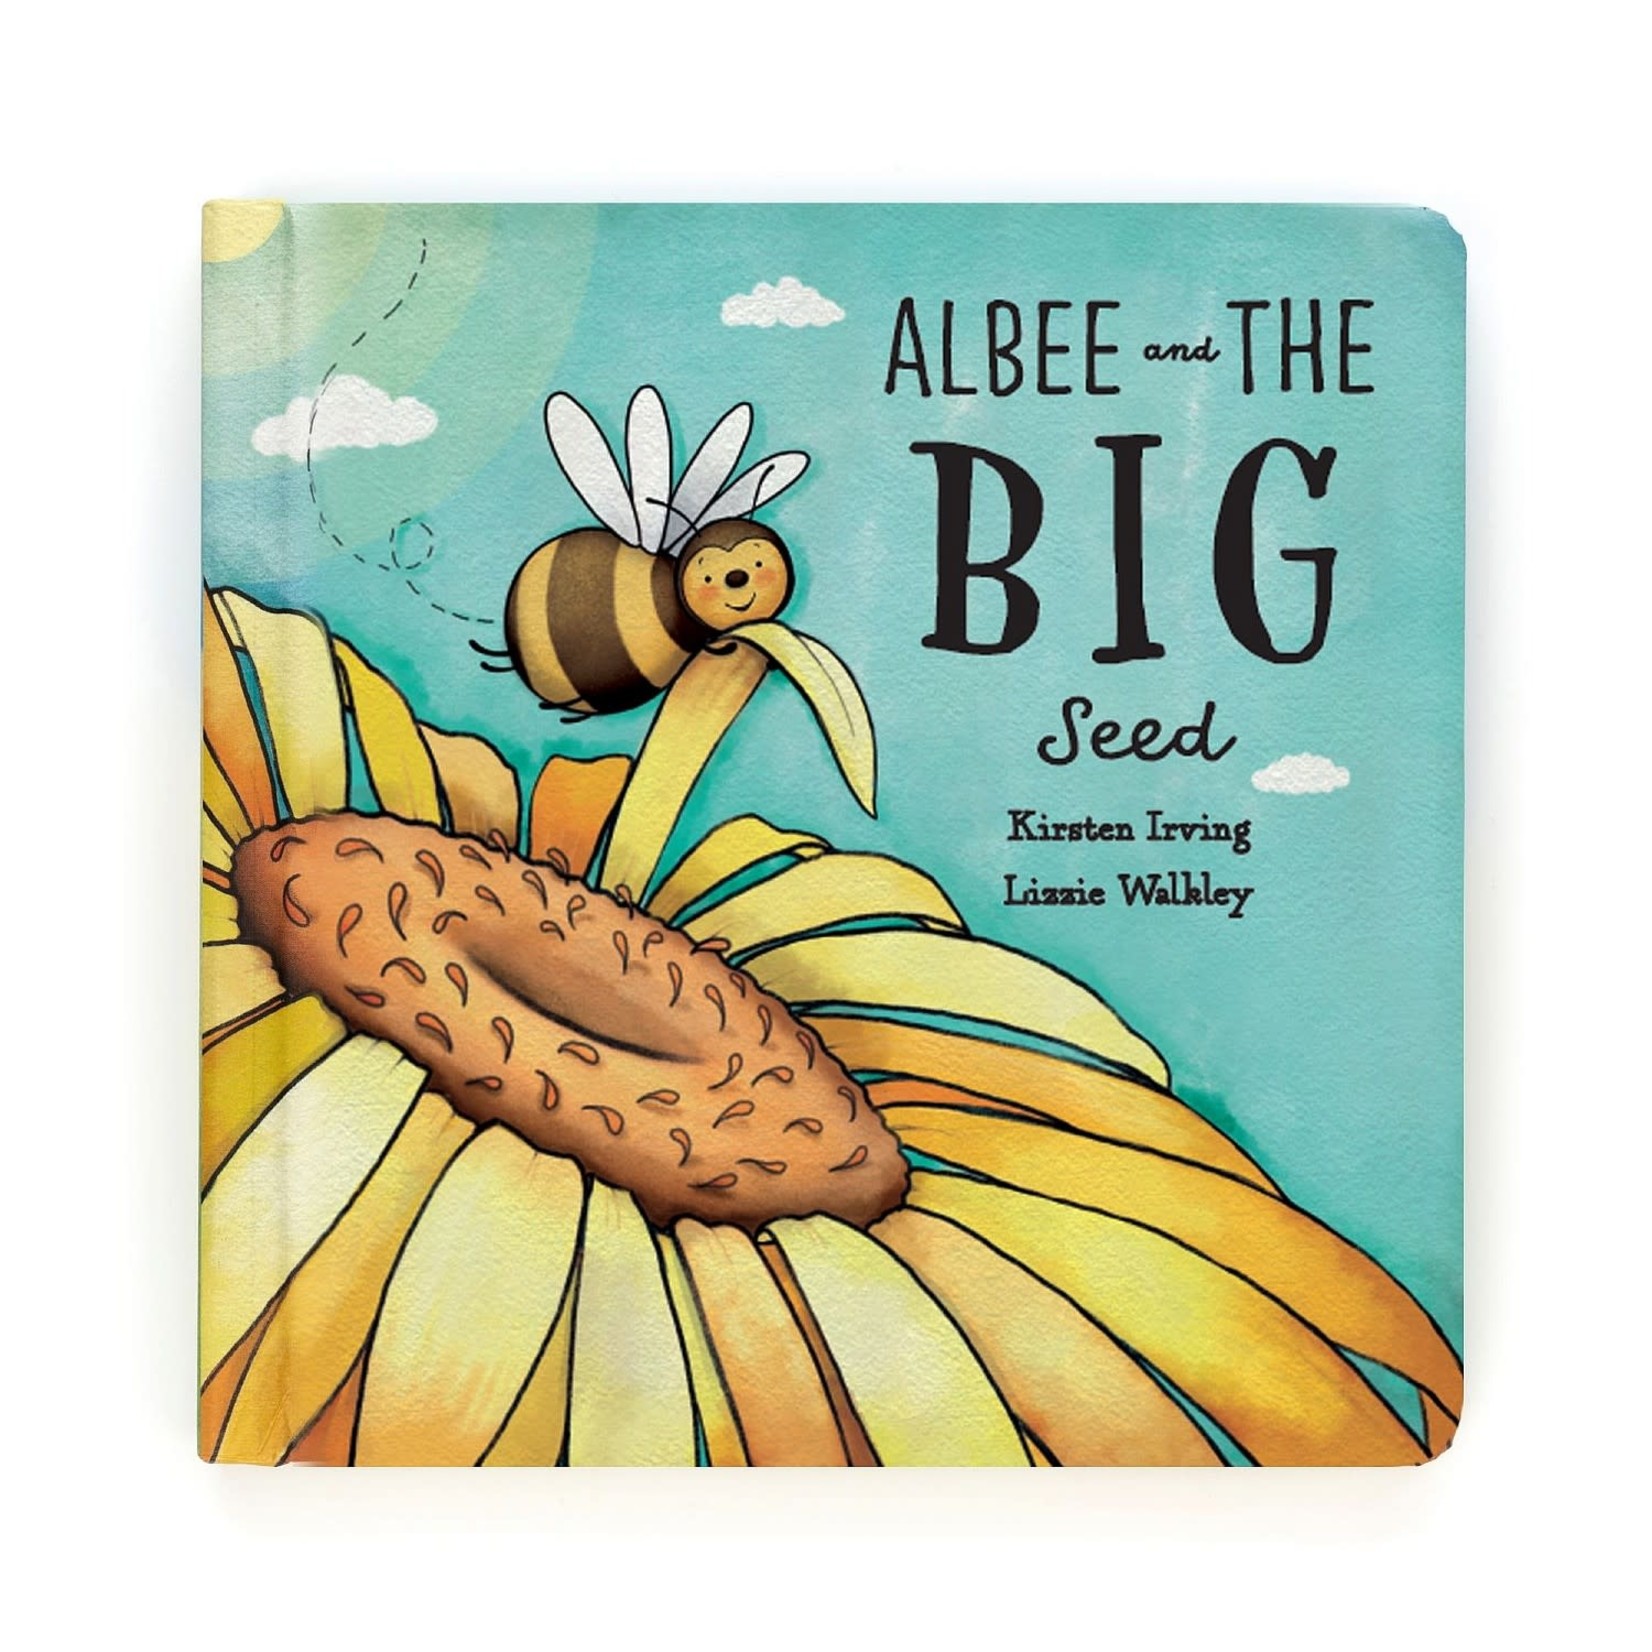 Jellycat JELLYCAT BOOK ALBEE AND THE BIG SEED